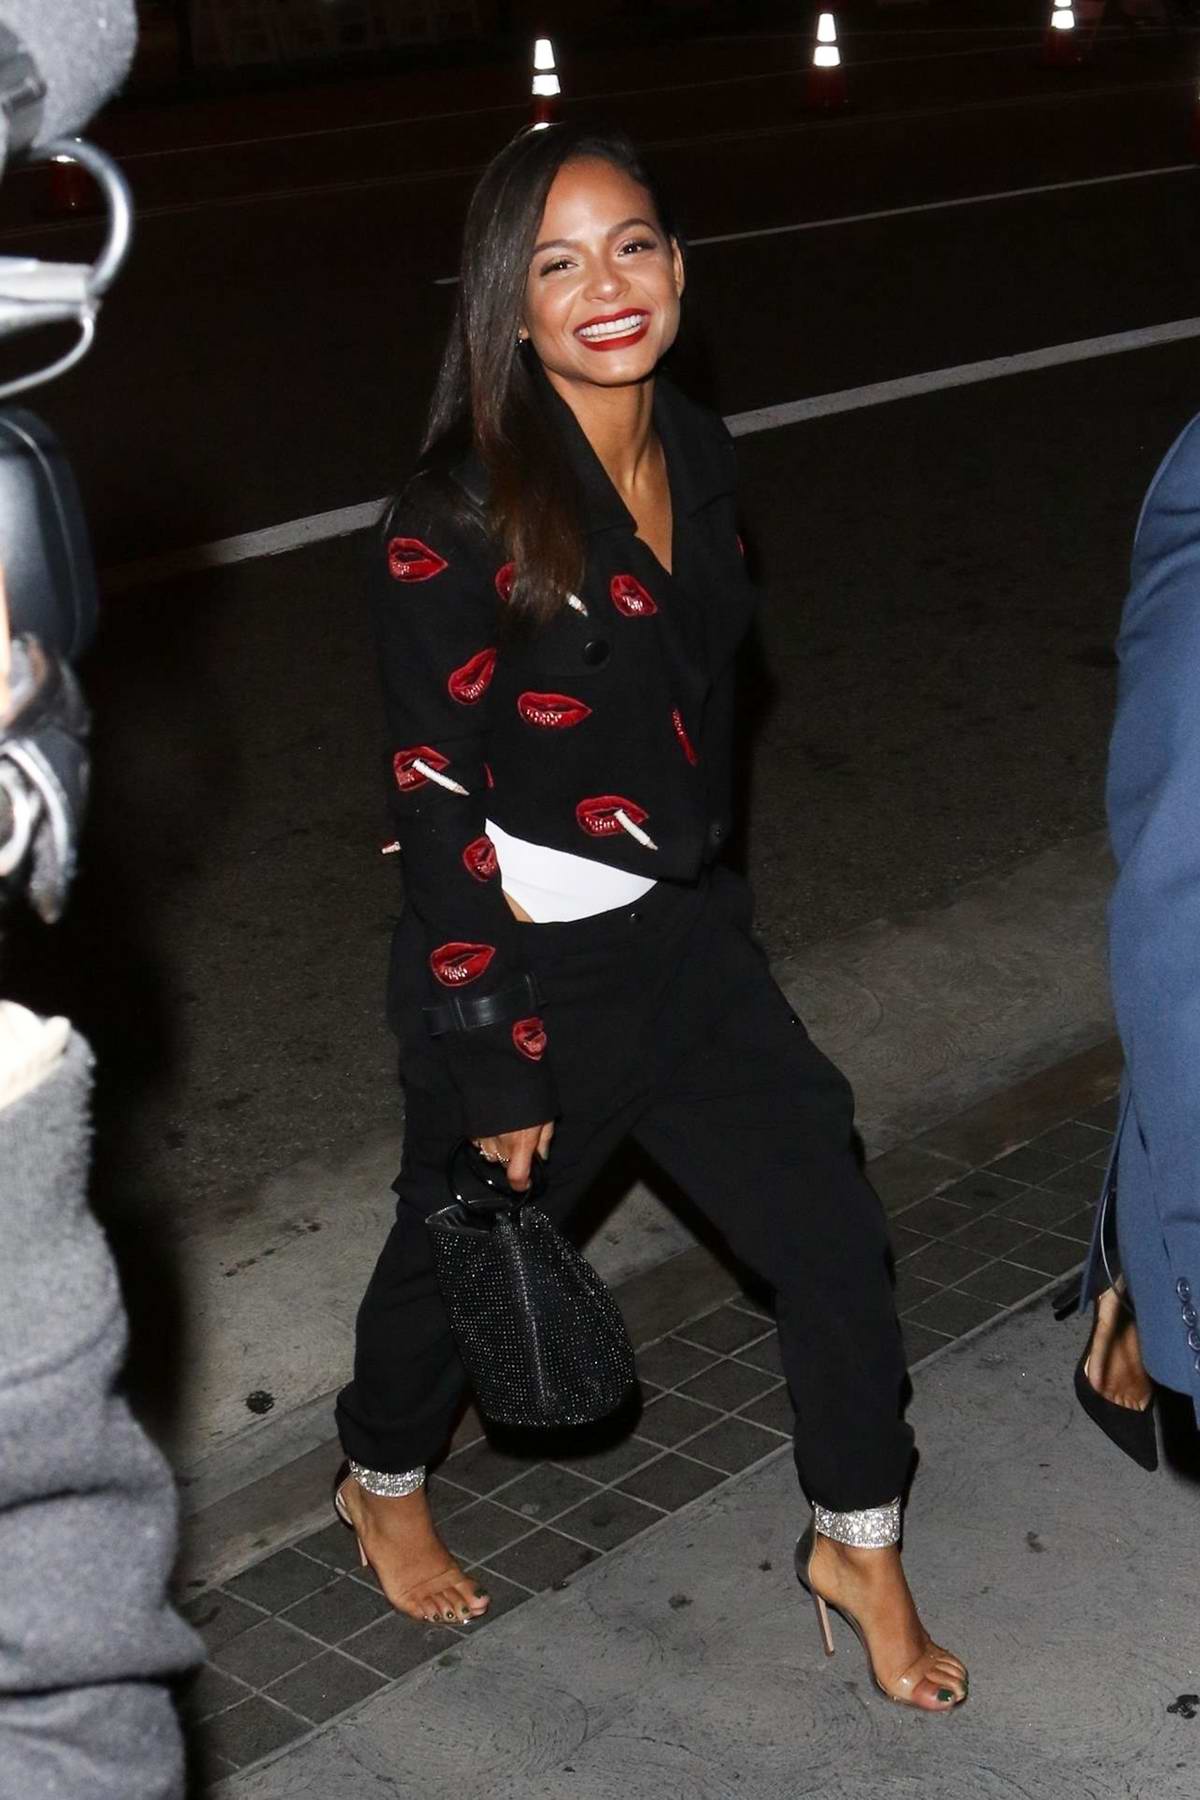 Christina Milian Wearing GUiSHEM black cargo Pant attending the premier of Columbia Pictures Miss Bala - Los Angeles, CA. January 30, 2019